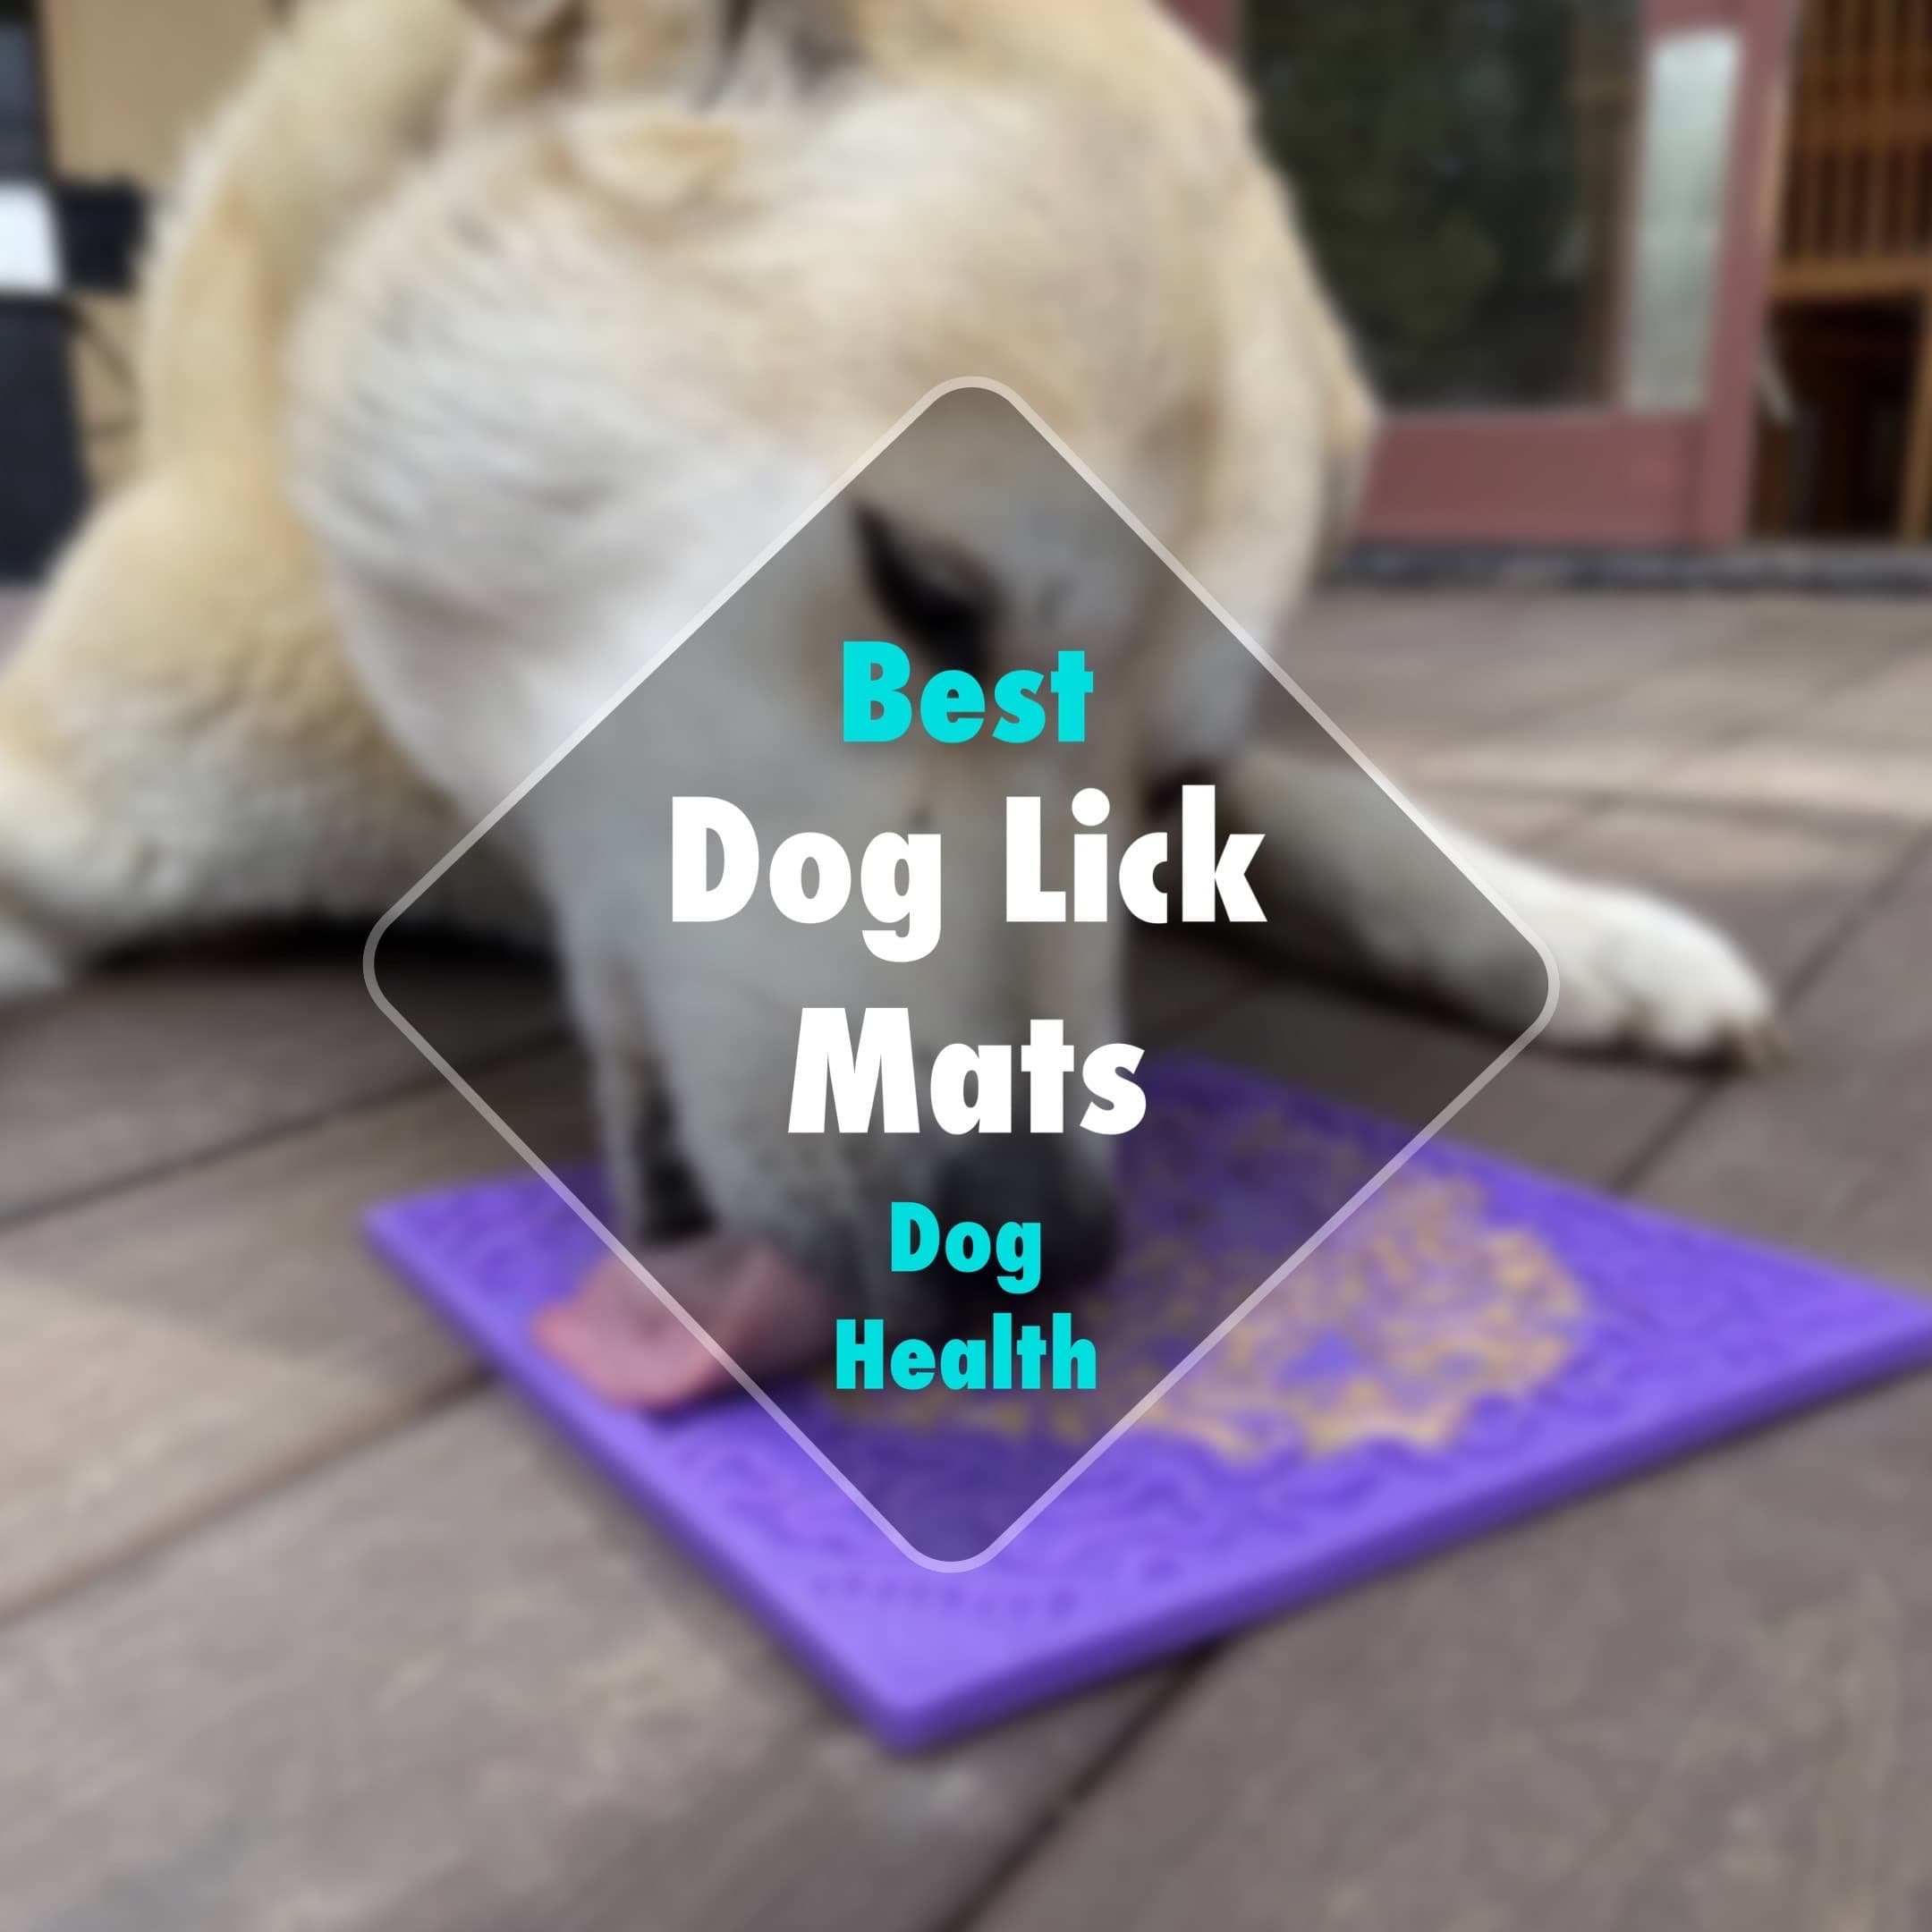 Should YOUR CAT use a lick mat? This is why we do! 